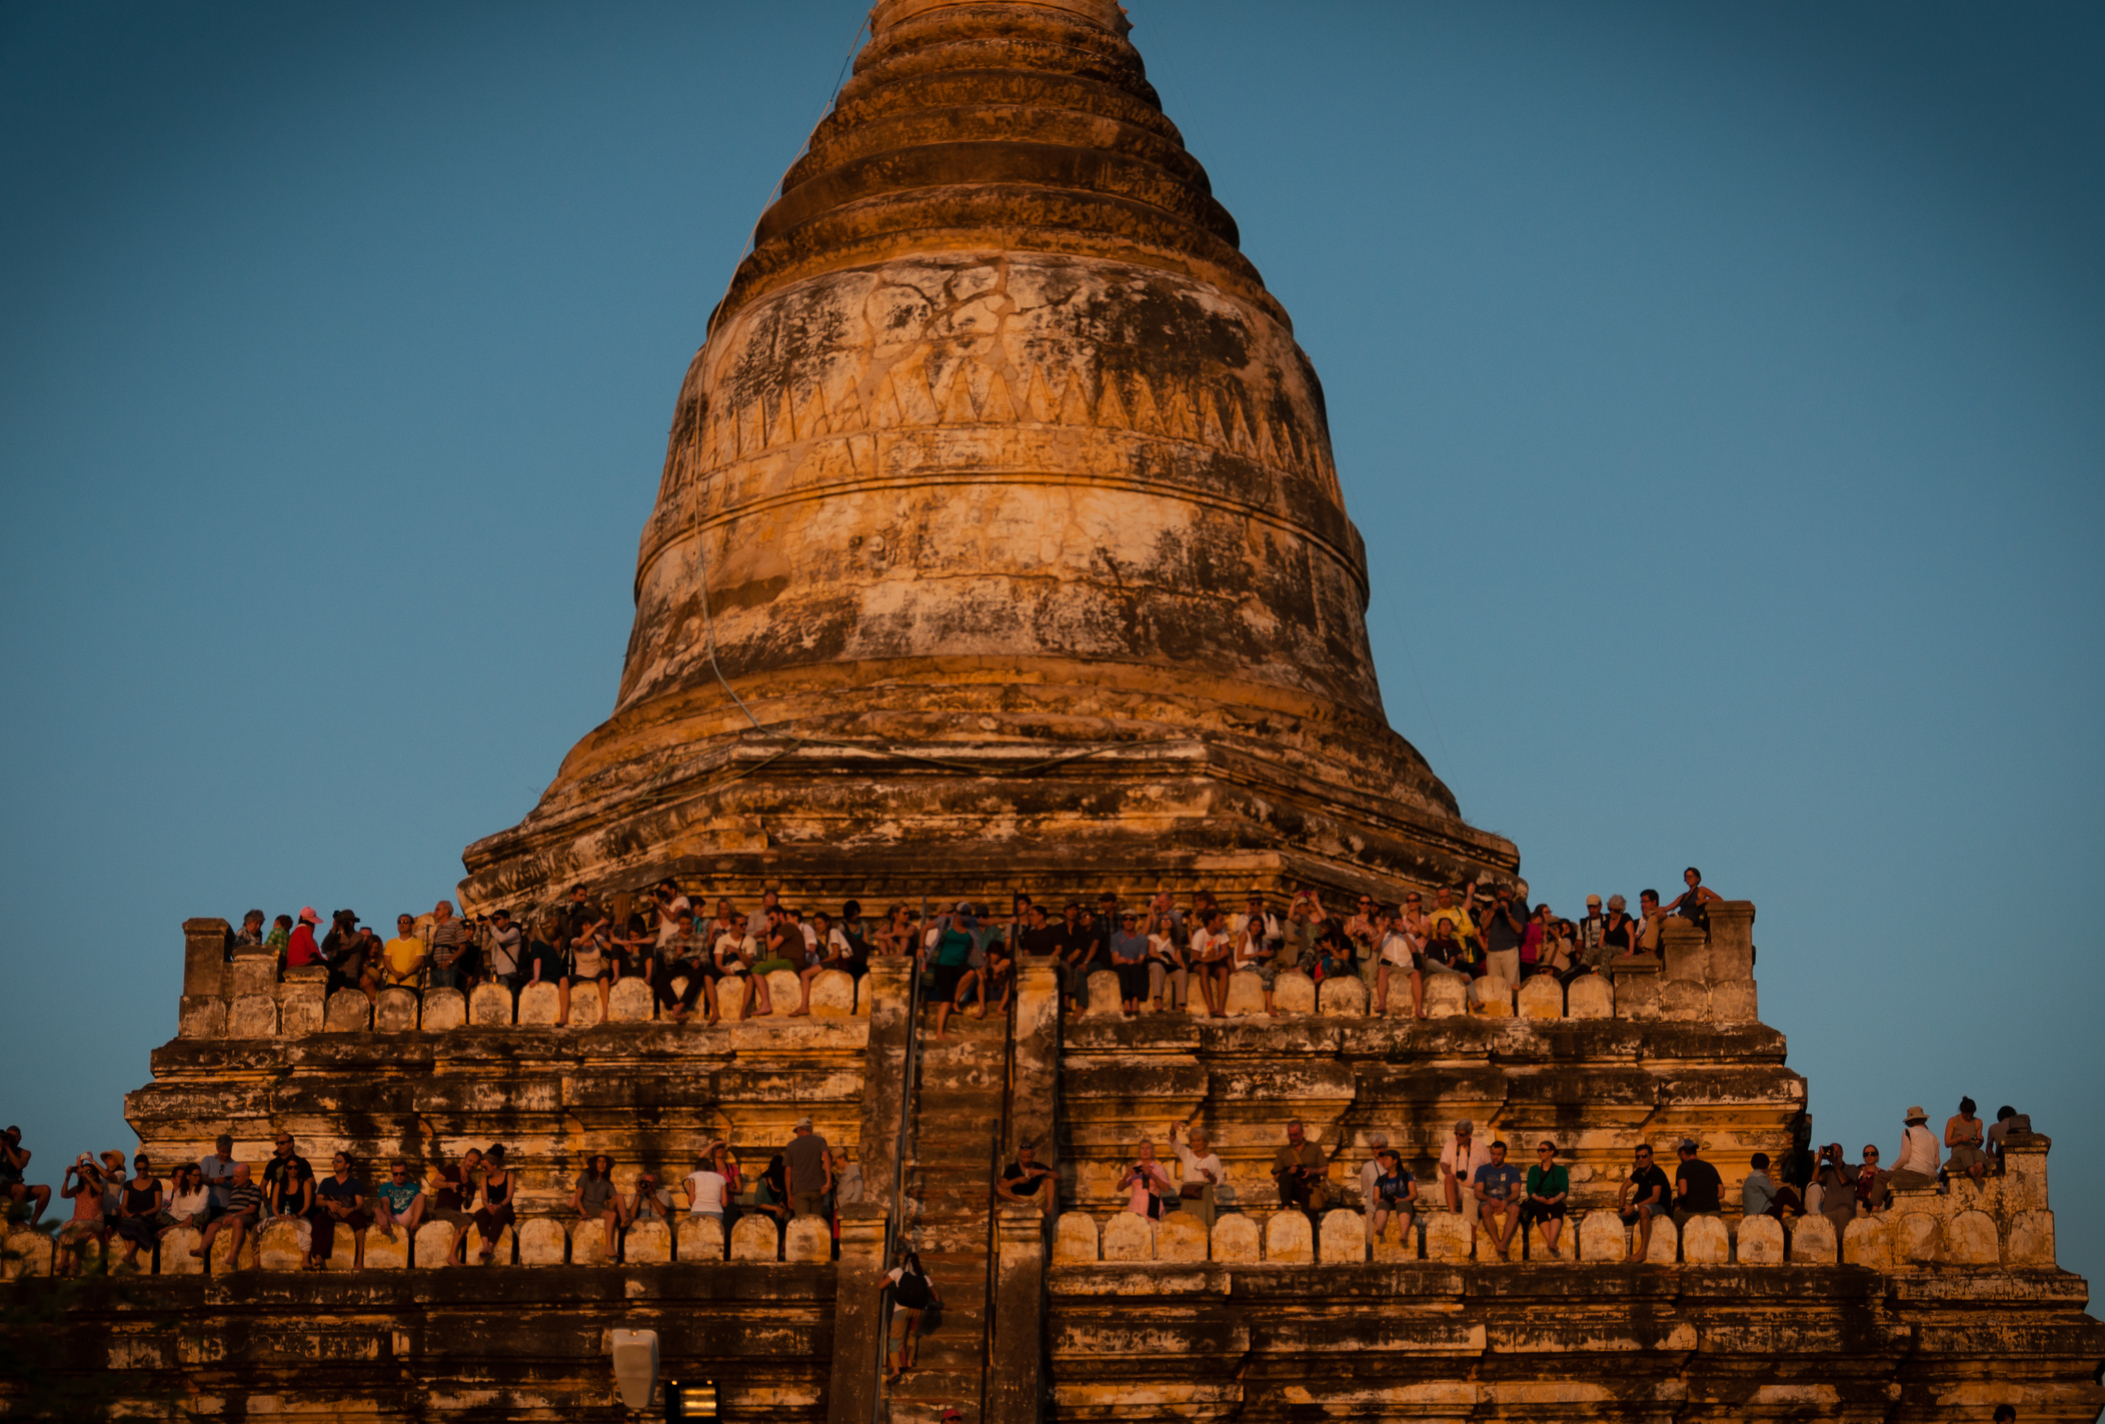 People observing from the terraces of the Shwesandaw Pagoda with a clear blue sky in the background